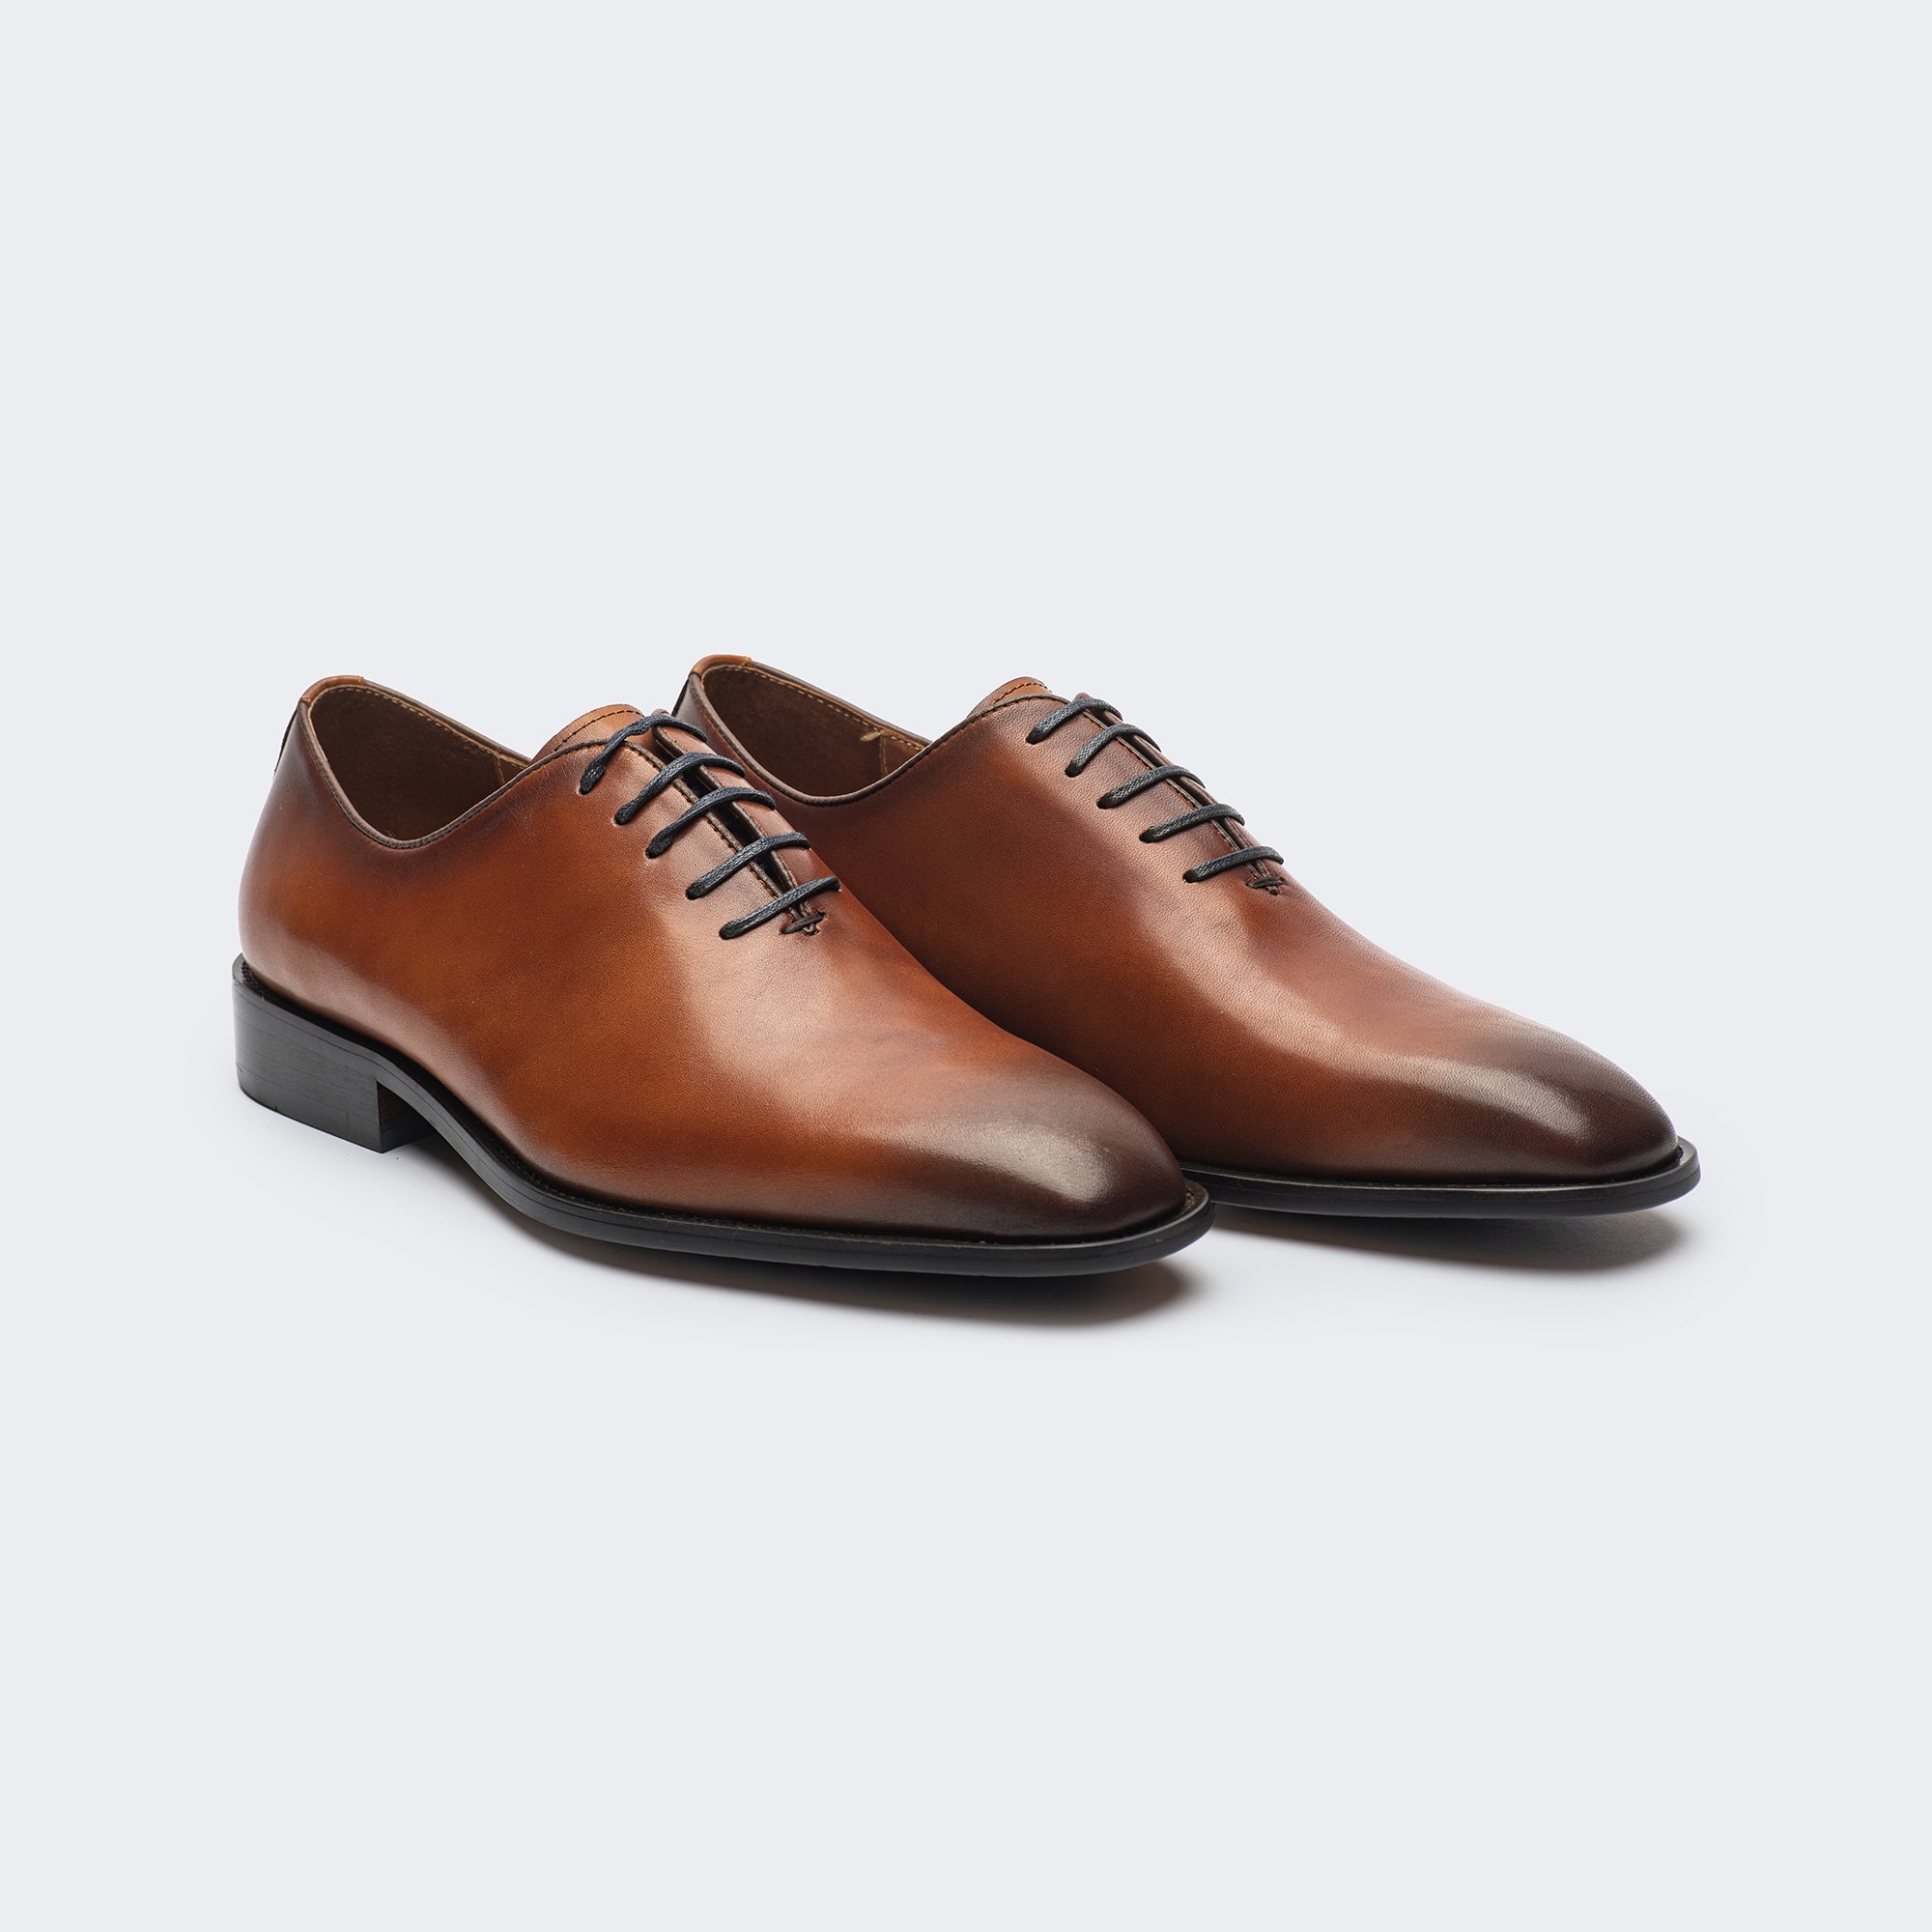 Nailing the Right Impression: Essential Shoe Colors for Men's Interview Attire